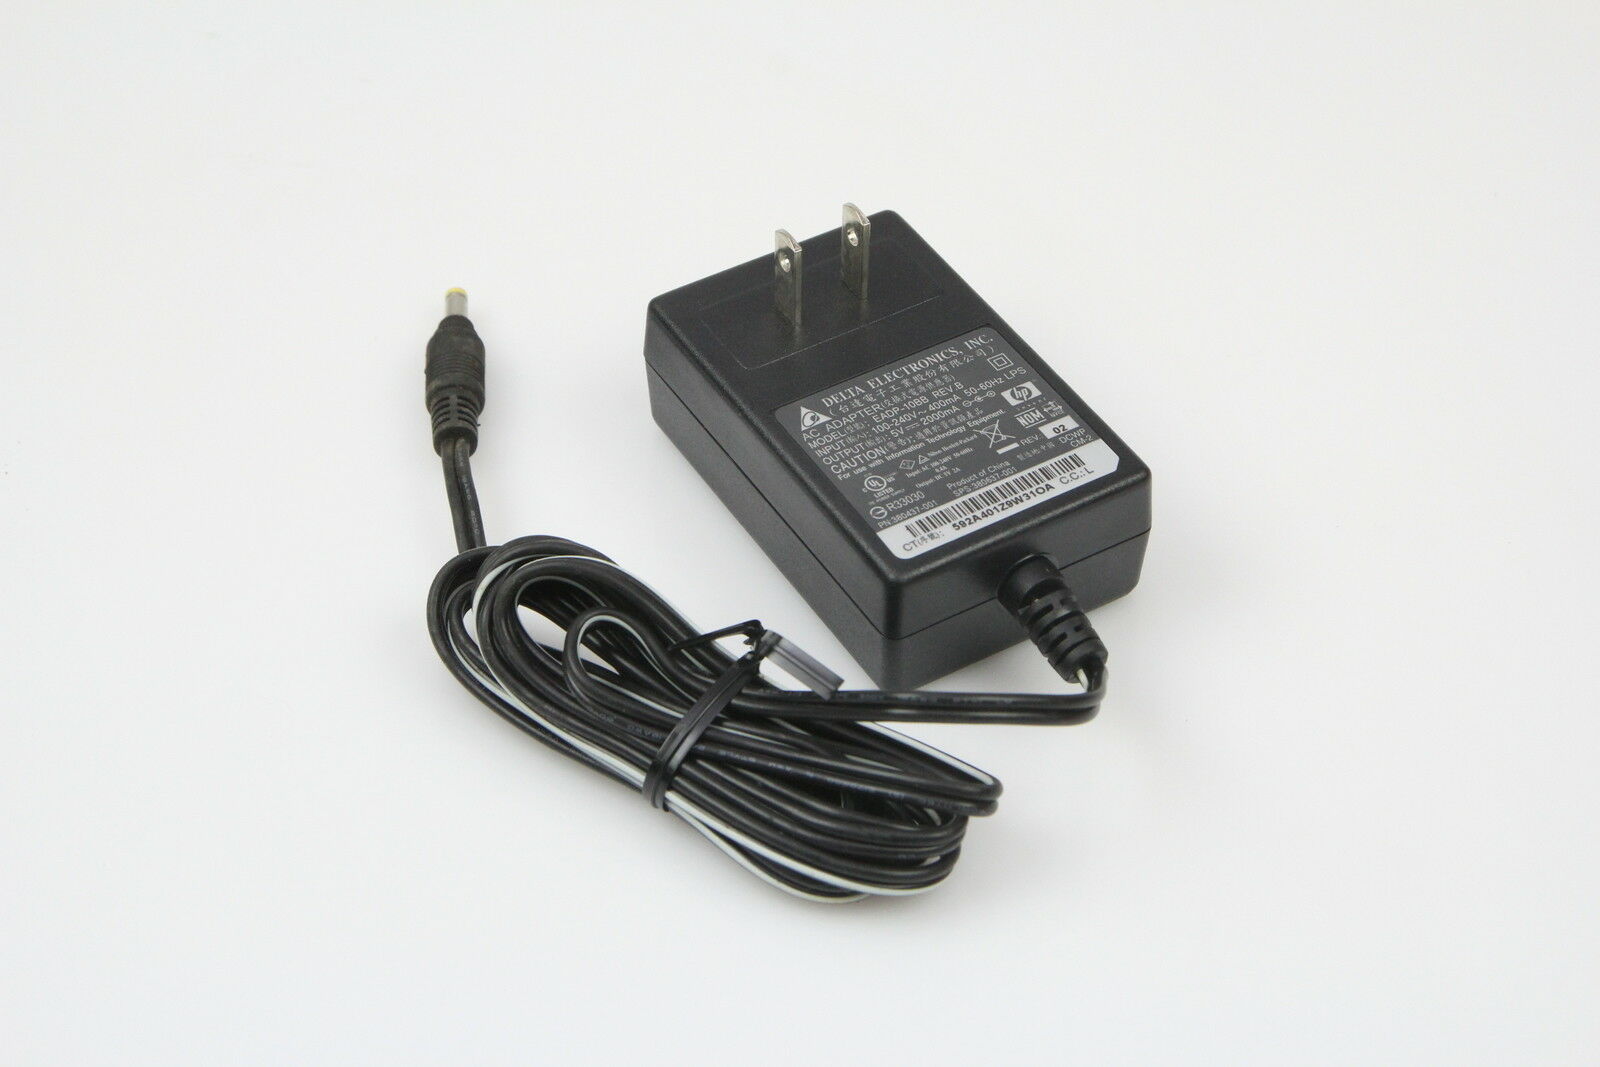 New Genuine 5V 2.0A Delta ADP-10SB EADP-10BB AC Adapter Power Charger US plug